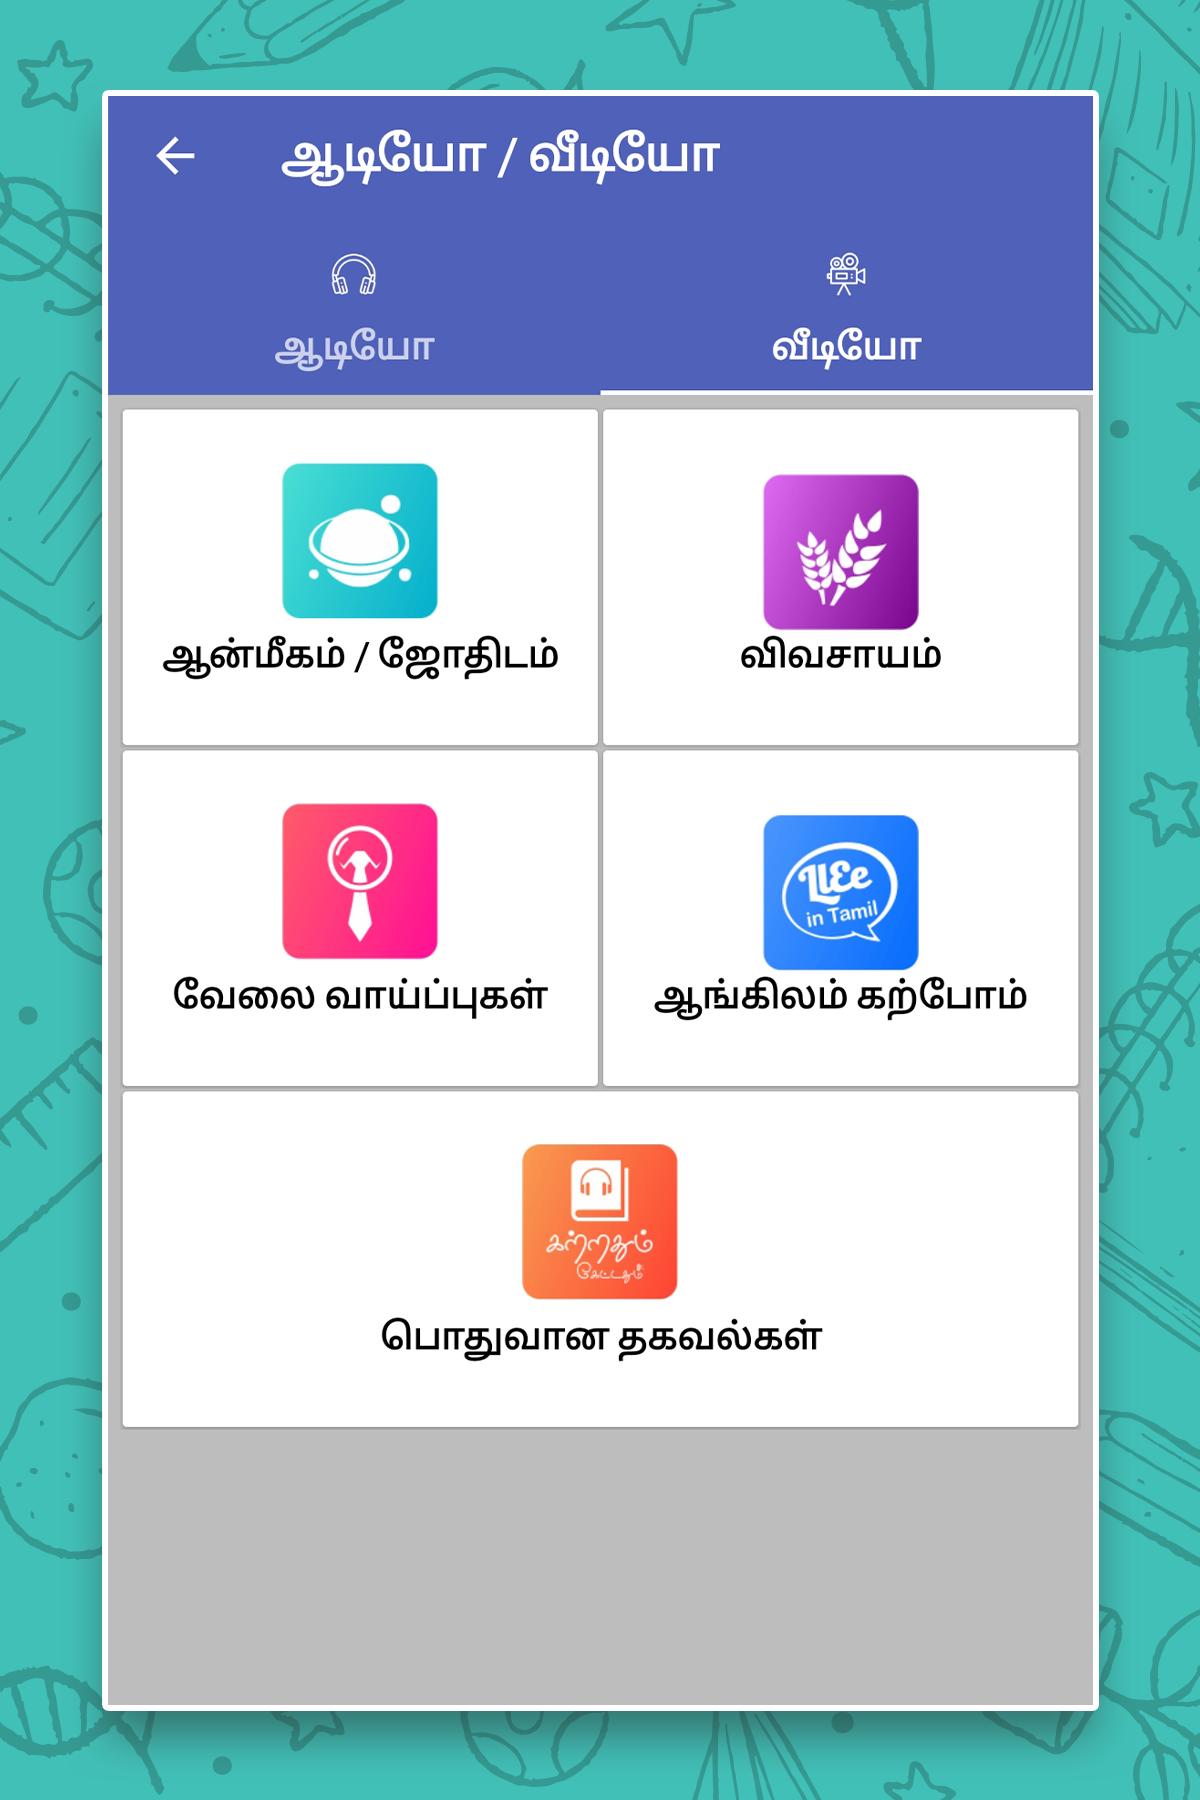 English To Tamil Dictionary For Android Apk Download (press ctrl+g to toggle between english and tamil). english to tamil dictionary for android